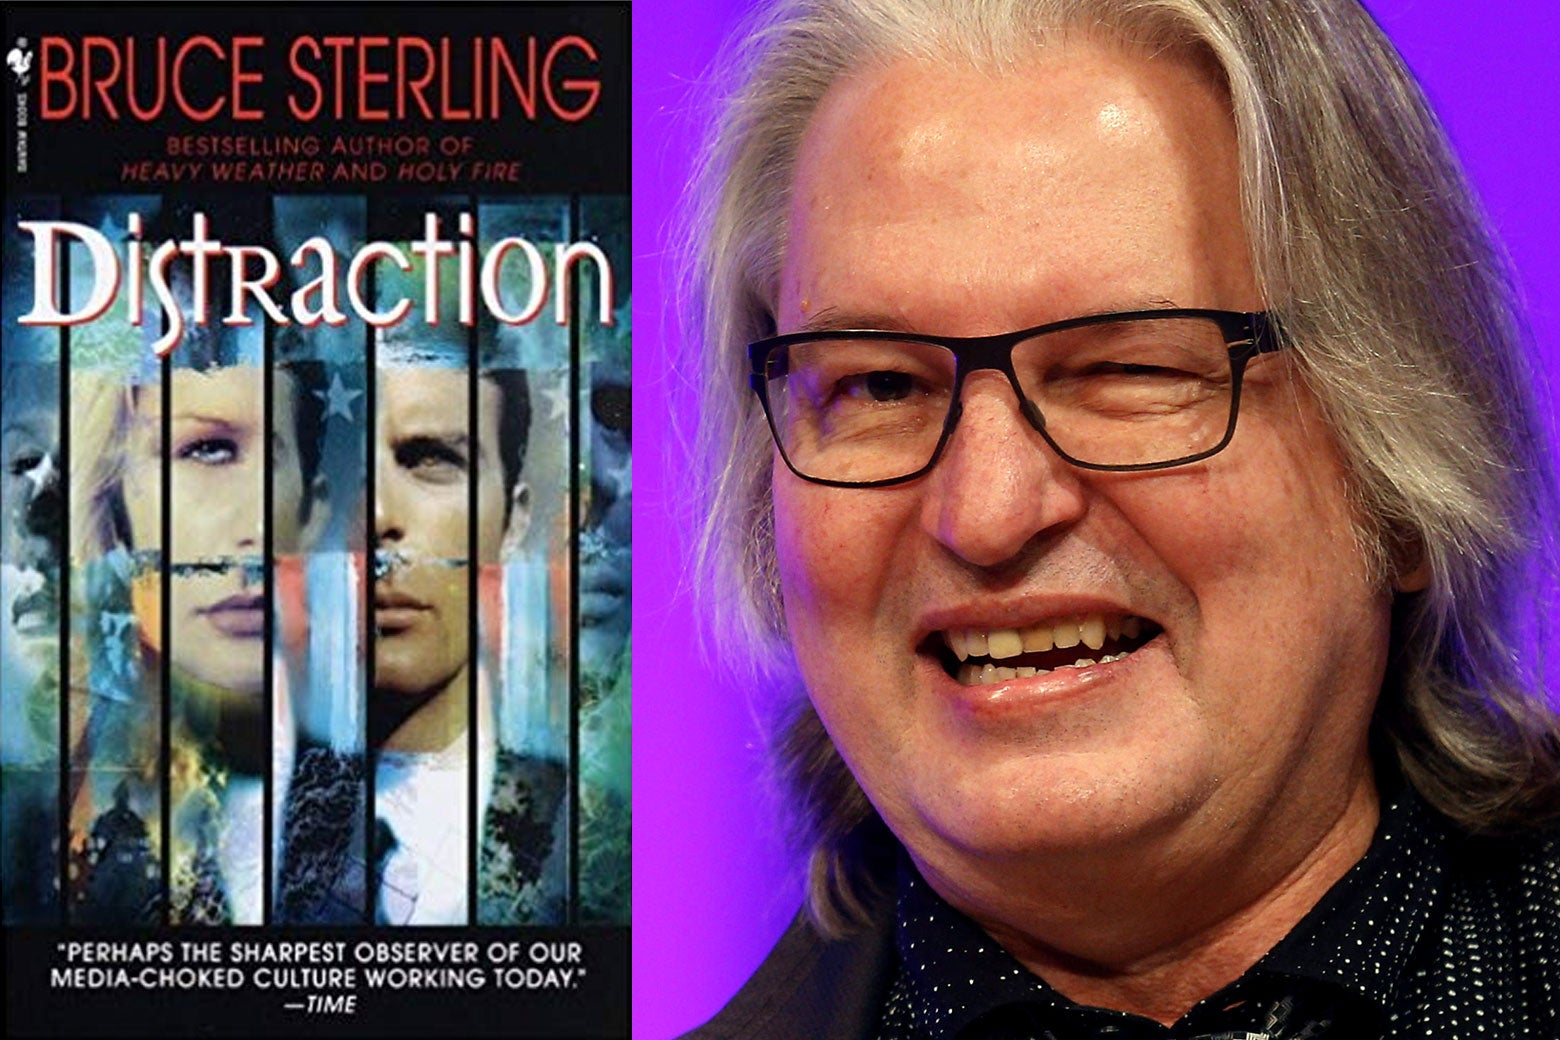 Distraction book cover and science-fiction author Bruce Sterling, as seen in Berlin in 2016.